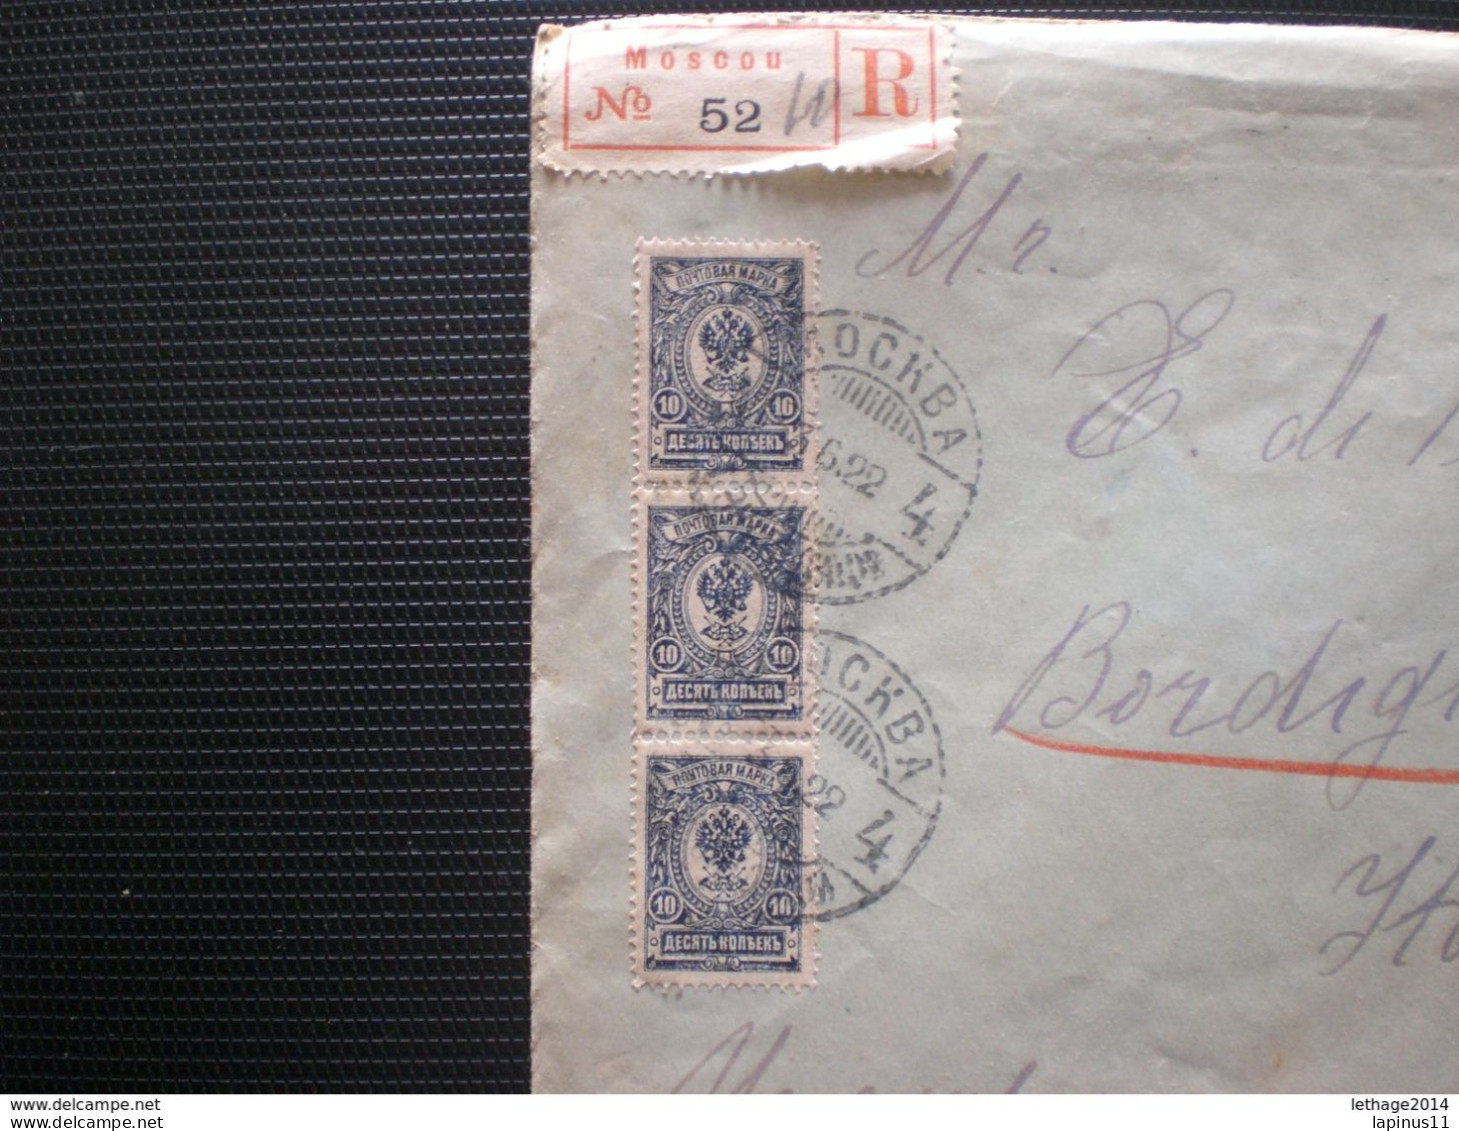 RUSSIA RUSSIE РОССИЯ STAMPS COVER 1922 REGISTER MAIL RUSSIE TO ITALY RRR RIF.TAGG. (78) - Briefe U. Dokumente